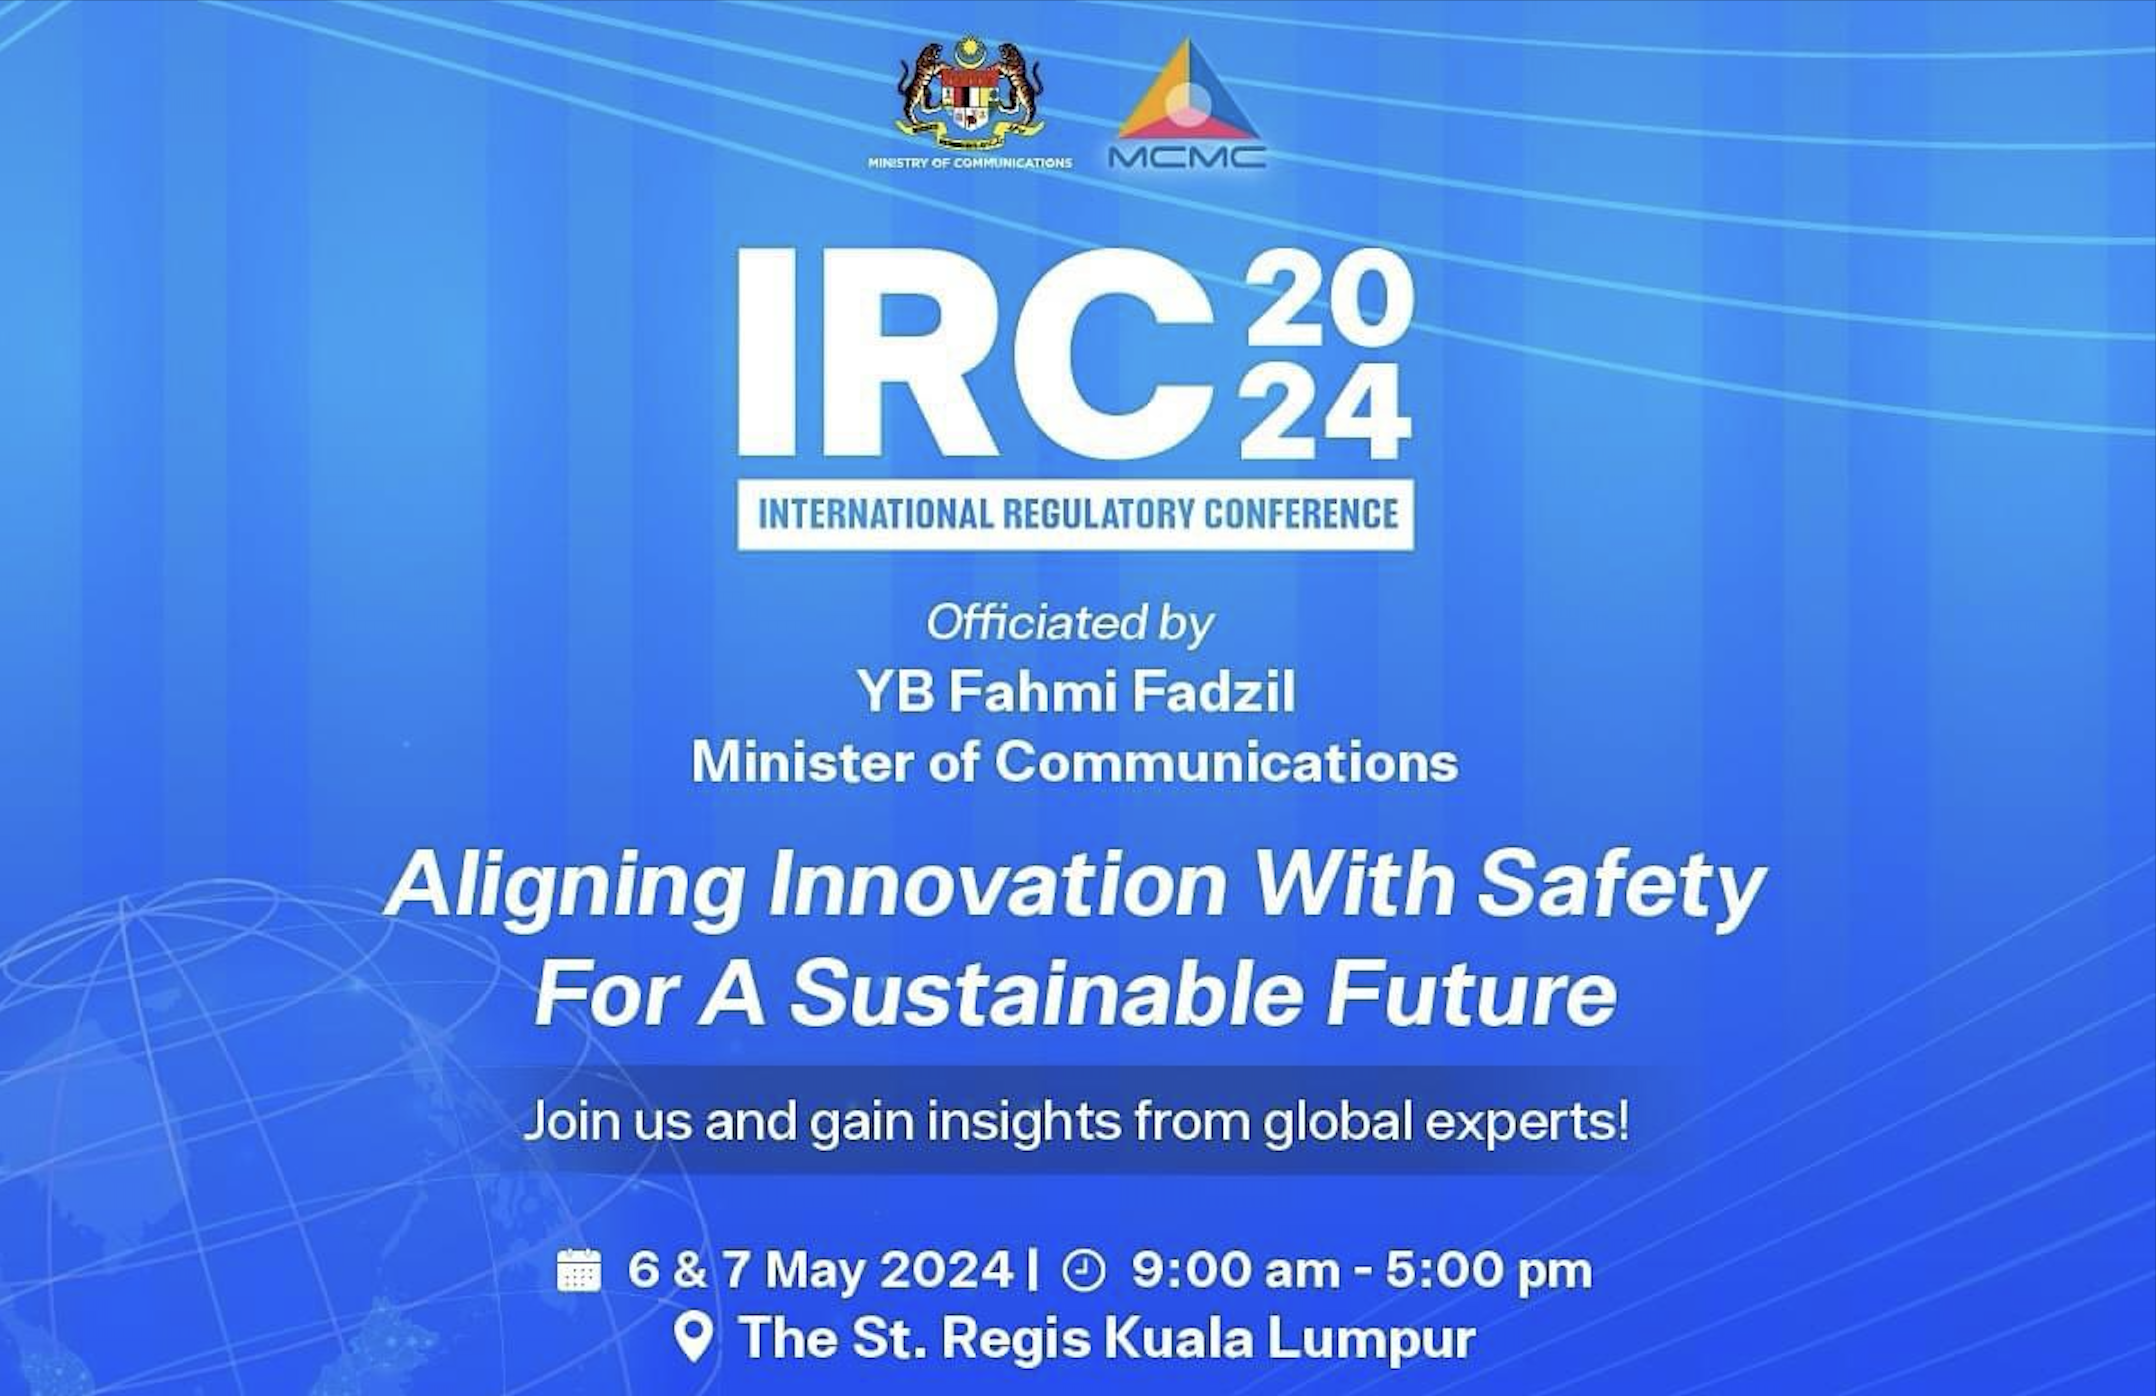 MCMC presents IRC 2024: Kuala Lumpur gears up for global dialogue on innovation and safety